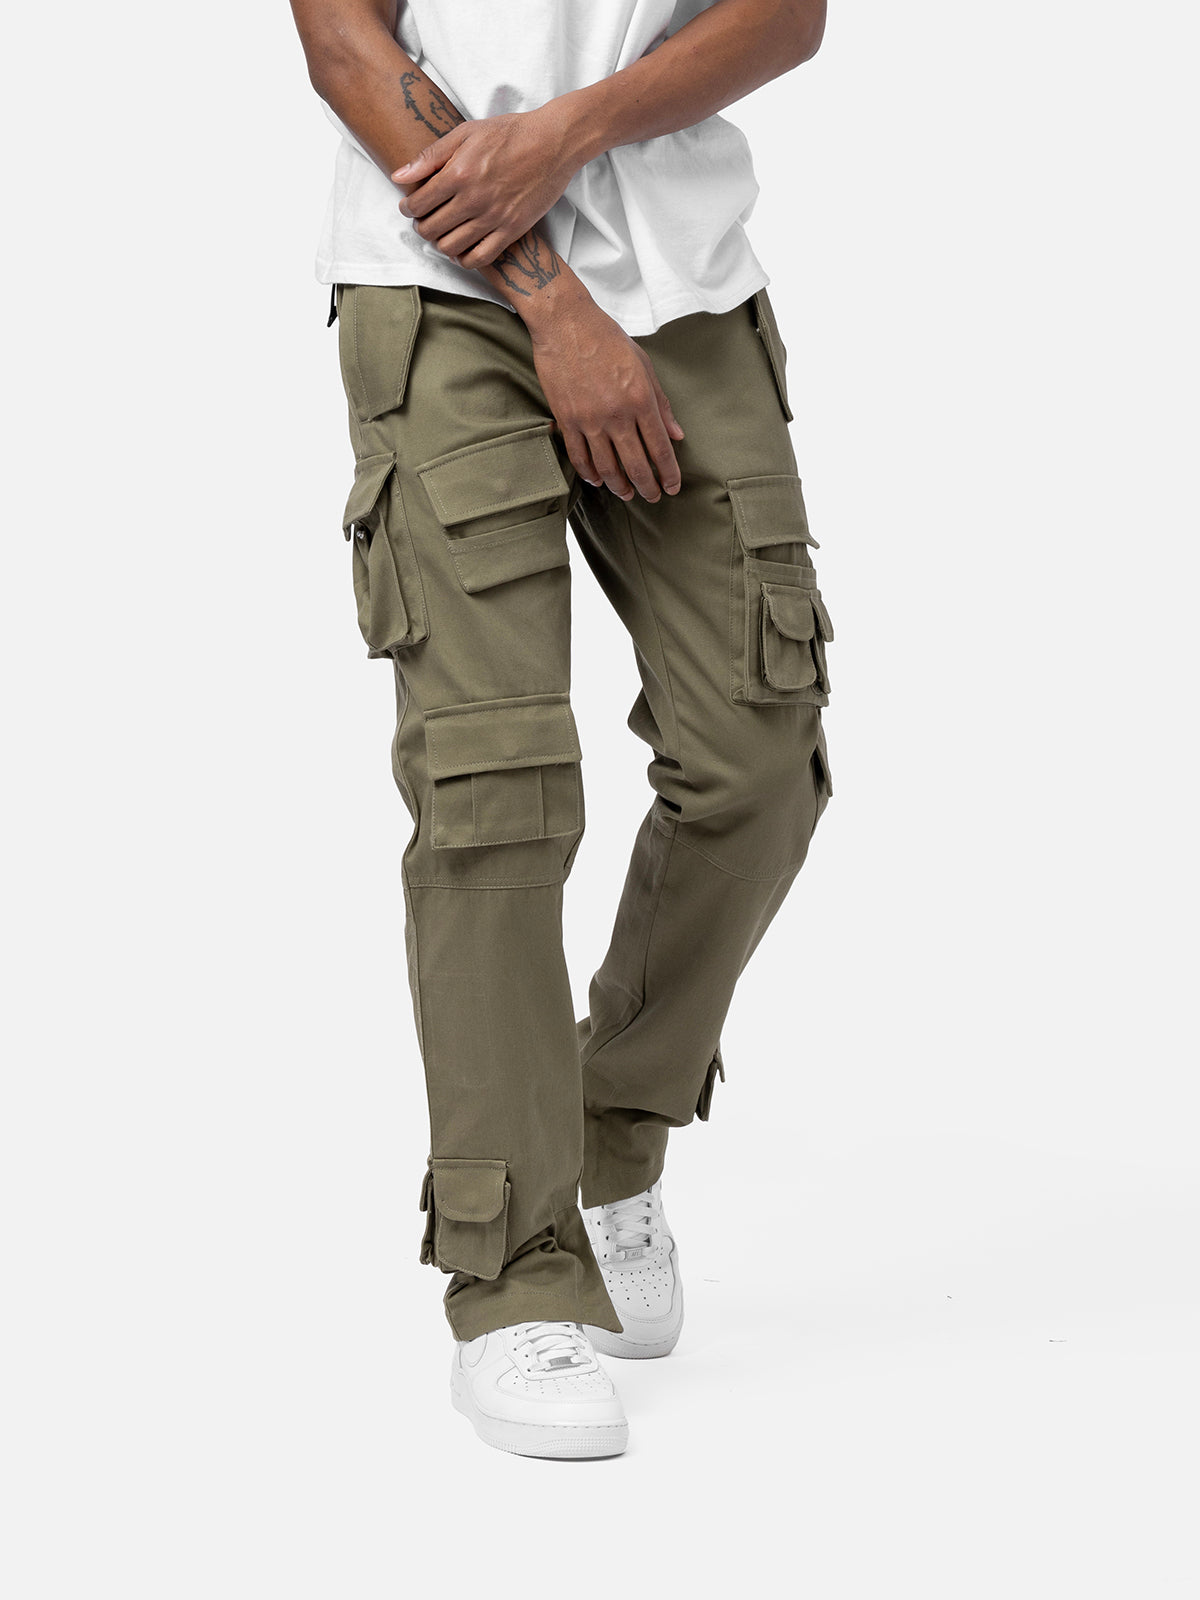 Buy Army Baggy Cargo Pants for Men and Unisex Cyberpunk Trousers Rave  Outfit Climbing Wear Mountain Gear Accessory Gift for Him Durable Comfy  Online in India - Etsy